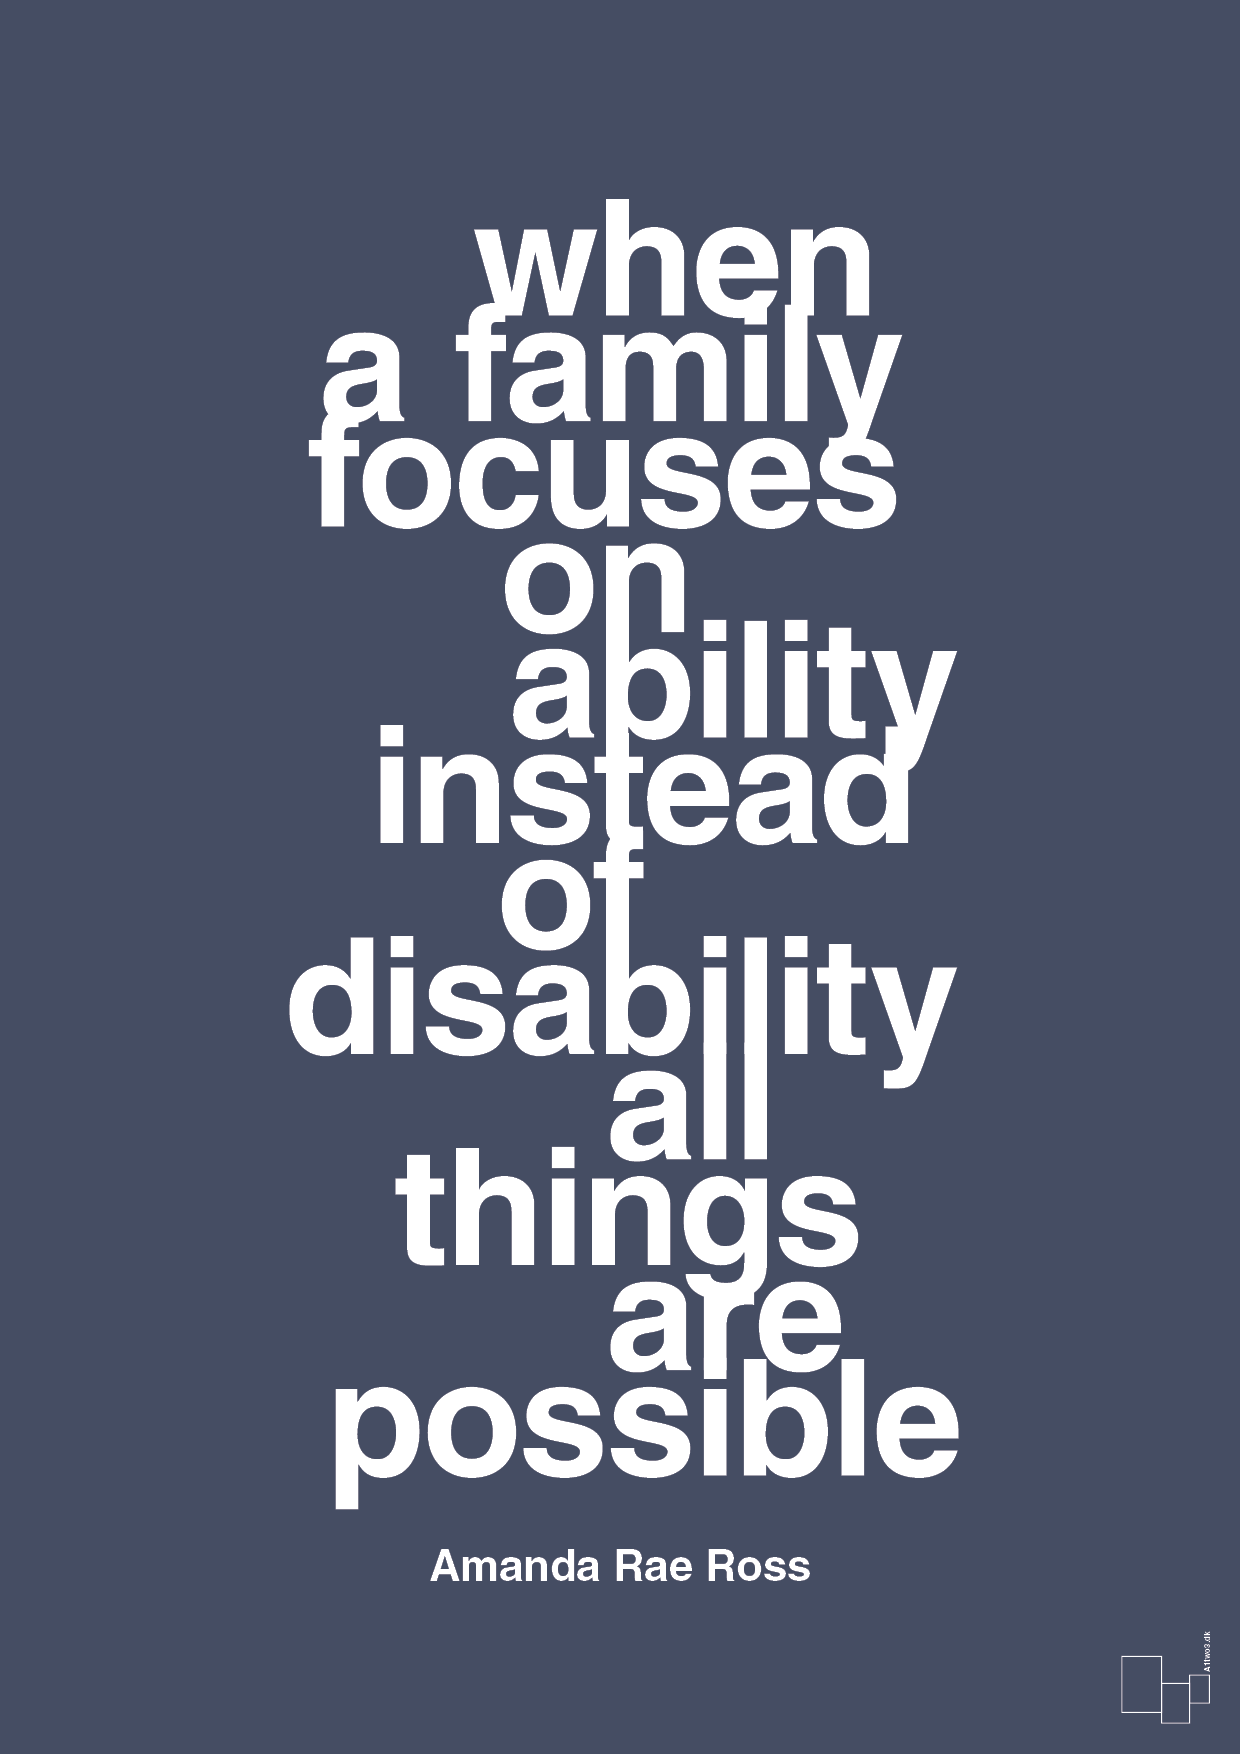 when a family focuses on ability instead of disability all things are possible - Plakat med Samfund i Petrol